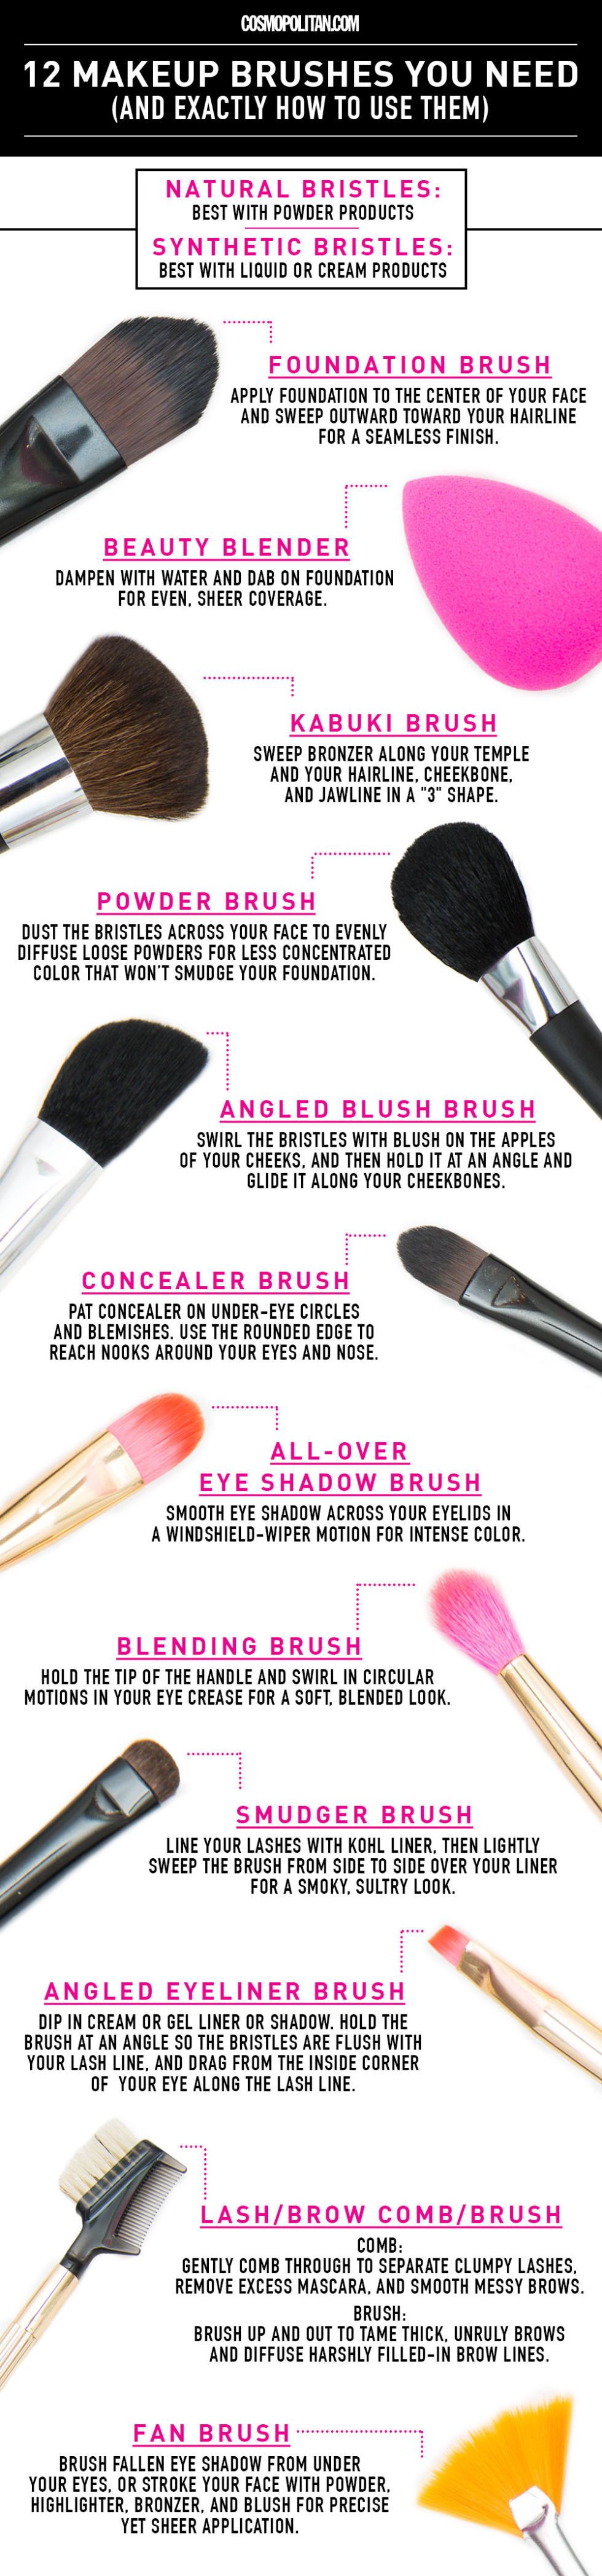 Makeup brushes and how to use them